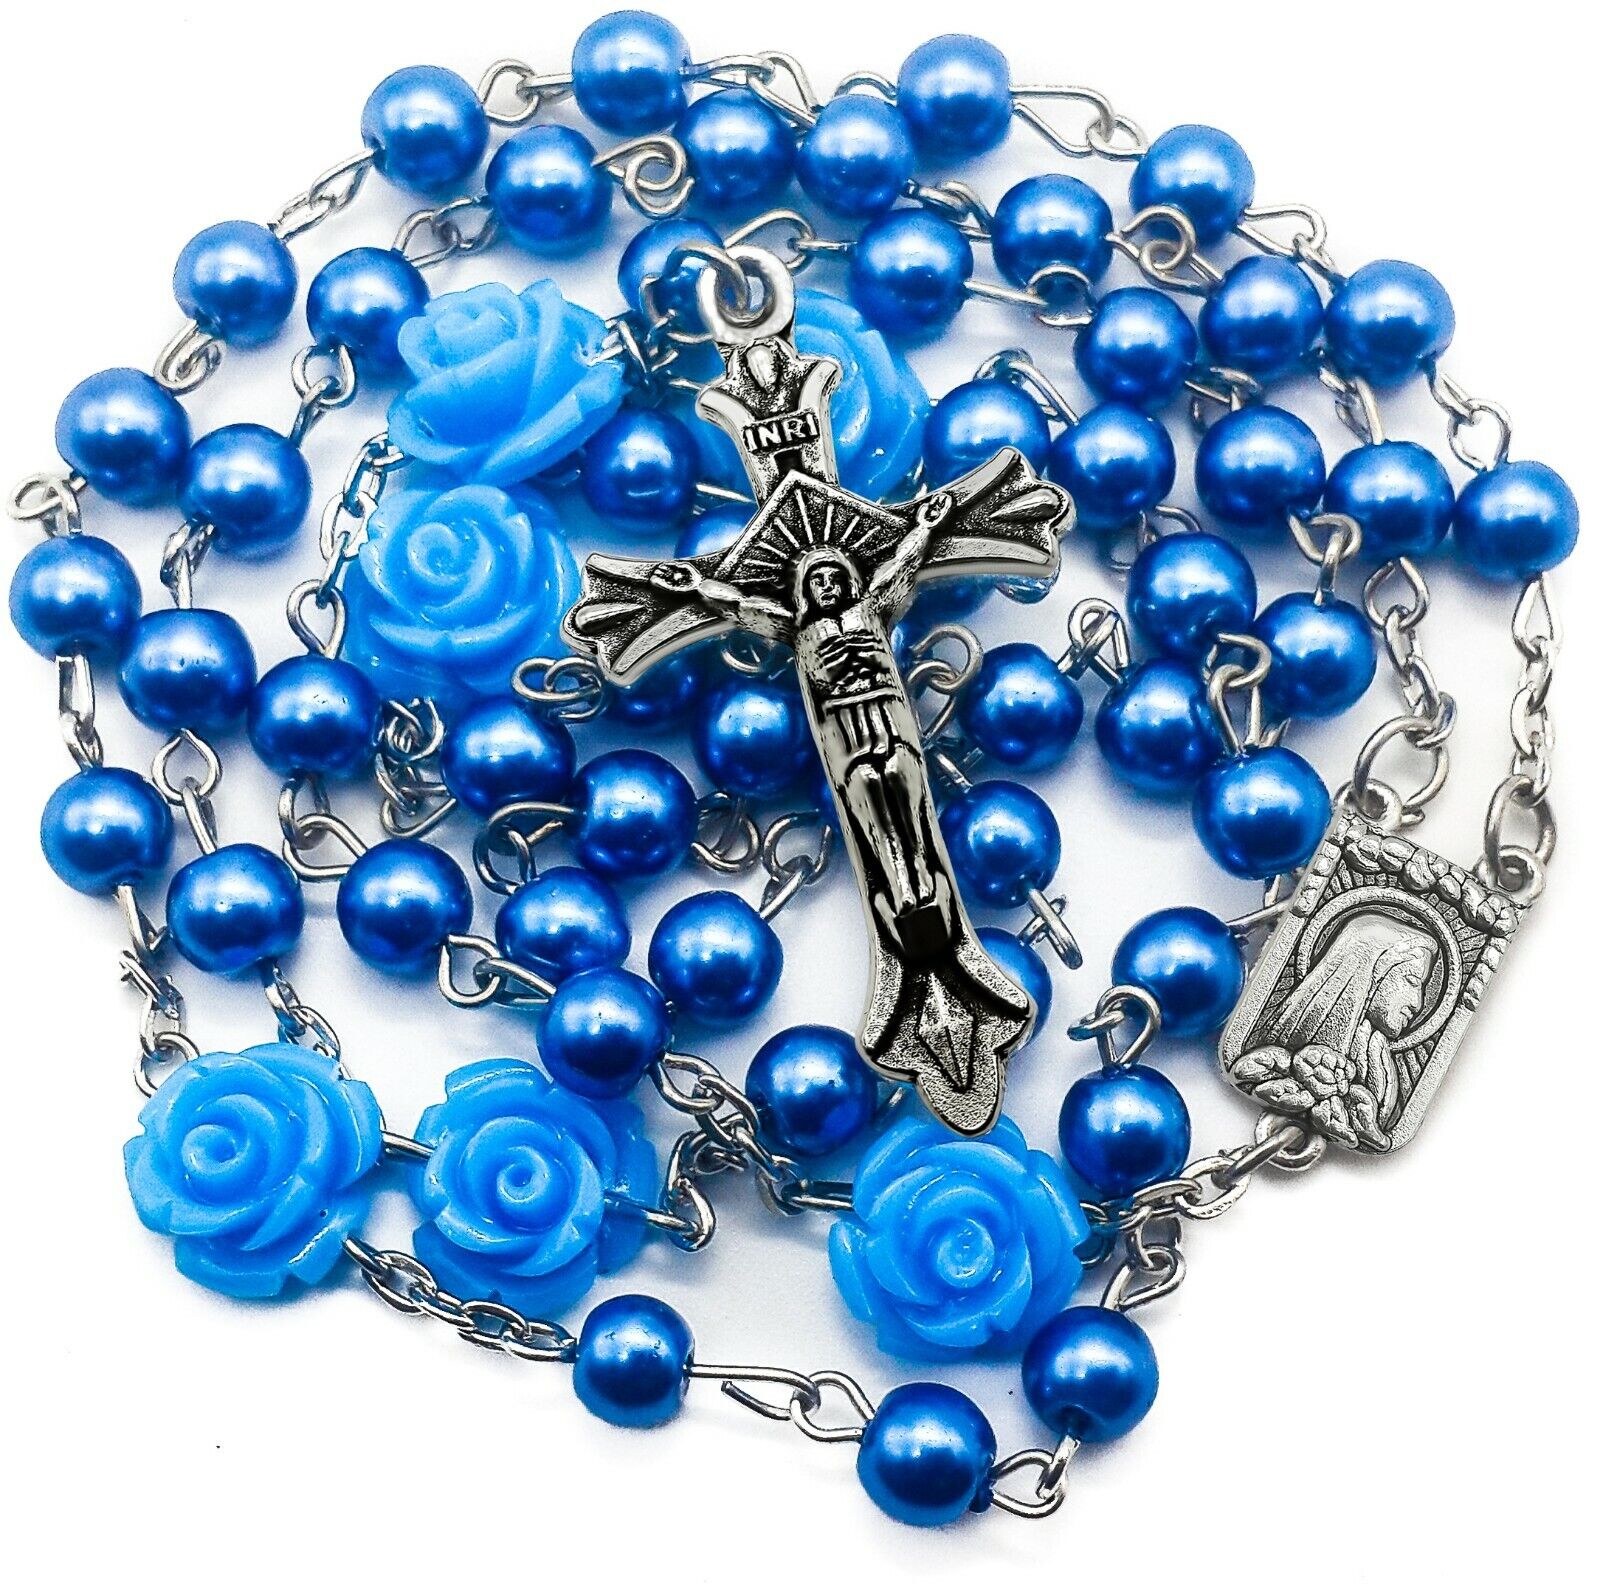 Catholic Blue Pearl Beads Rosary Necklace Our Rose Flowers Lourdes Medal Cross